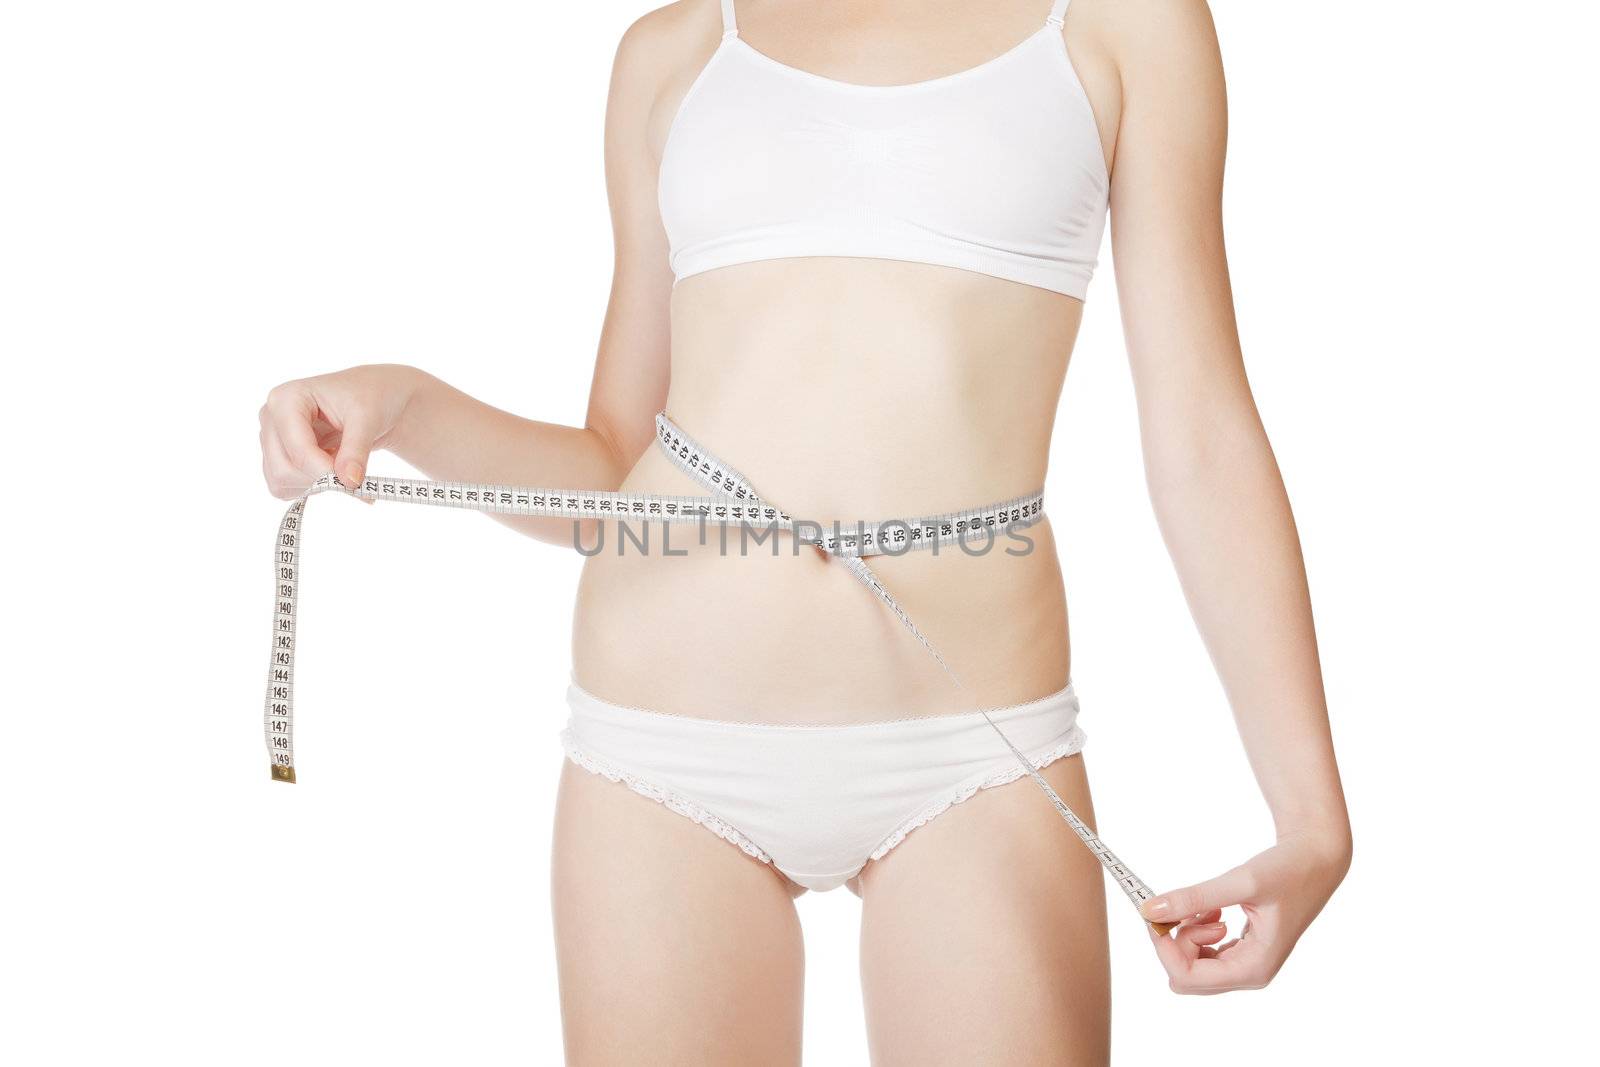 Woman measuring size of her waist with a tape measure. Isolated on white background.